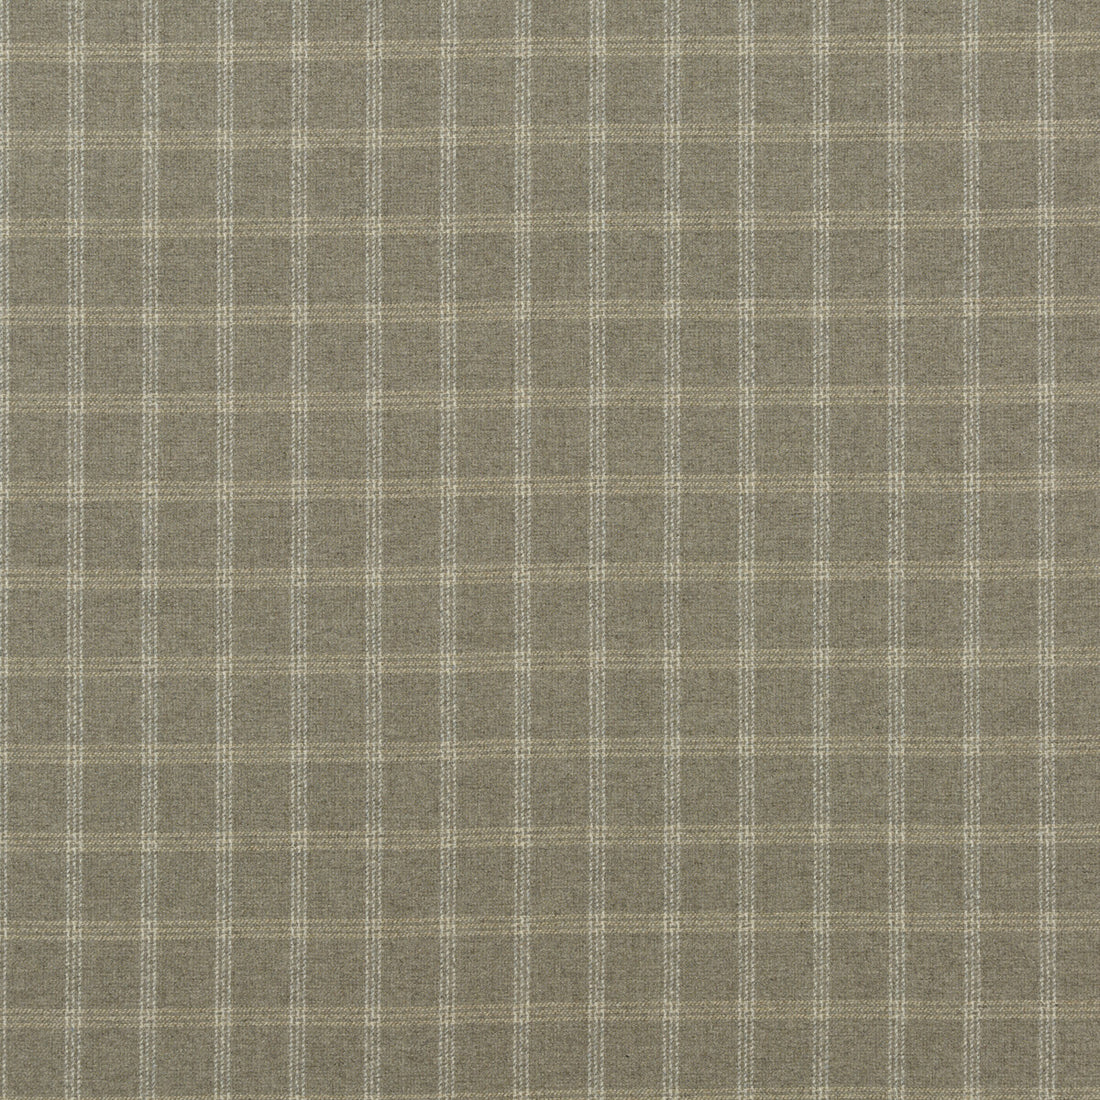 Bute fabric in stone color - pattern FD749.K102.0 - by Mulberry in the Festival collection